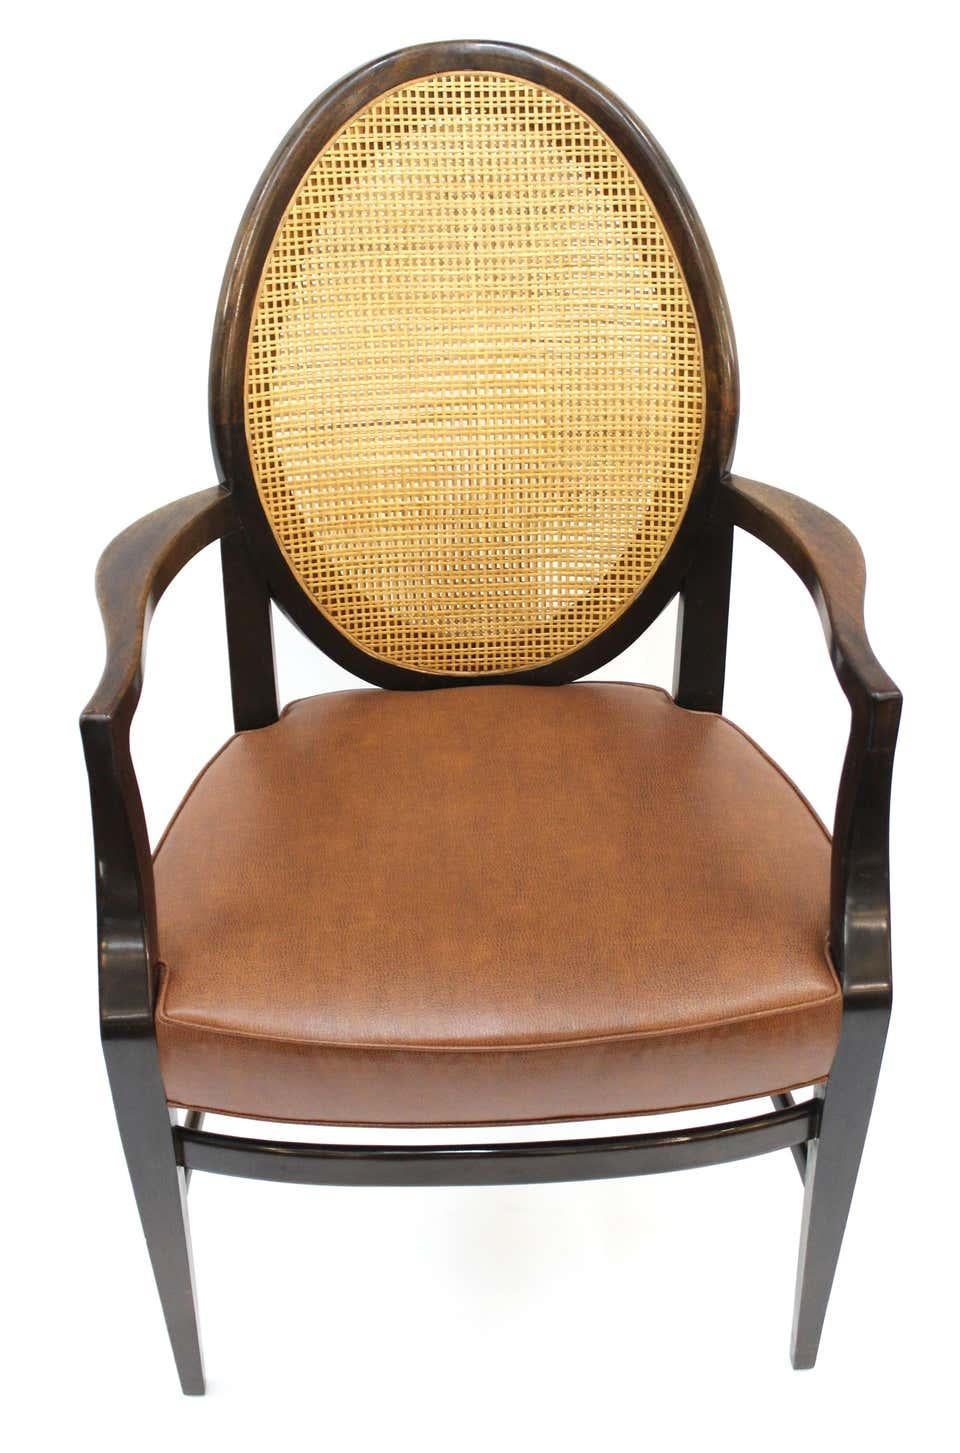 American Mid-Century Modern pair of armchairs with caned backs and faux-leather upholstered seats, attributed to Harvey Probber during the 1960s. The pair is in great vintage condition and has been completely restored.